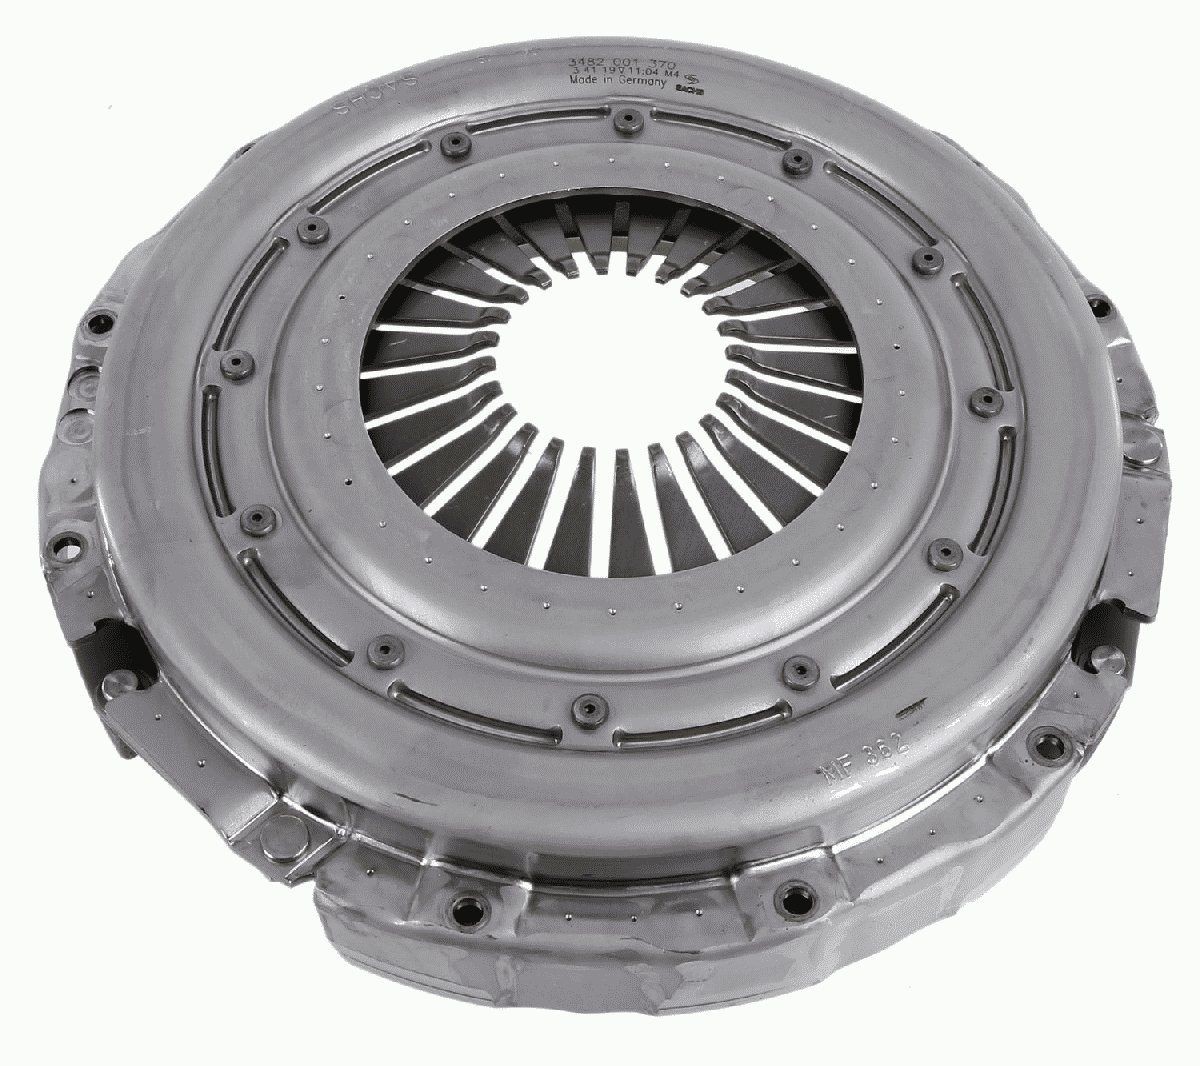 SACHS Clutch cover 3482 001 370 buy